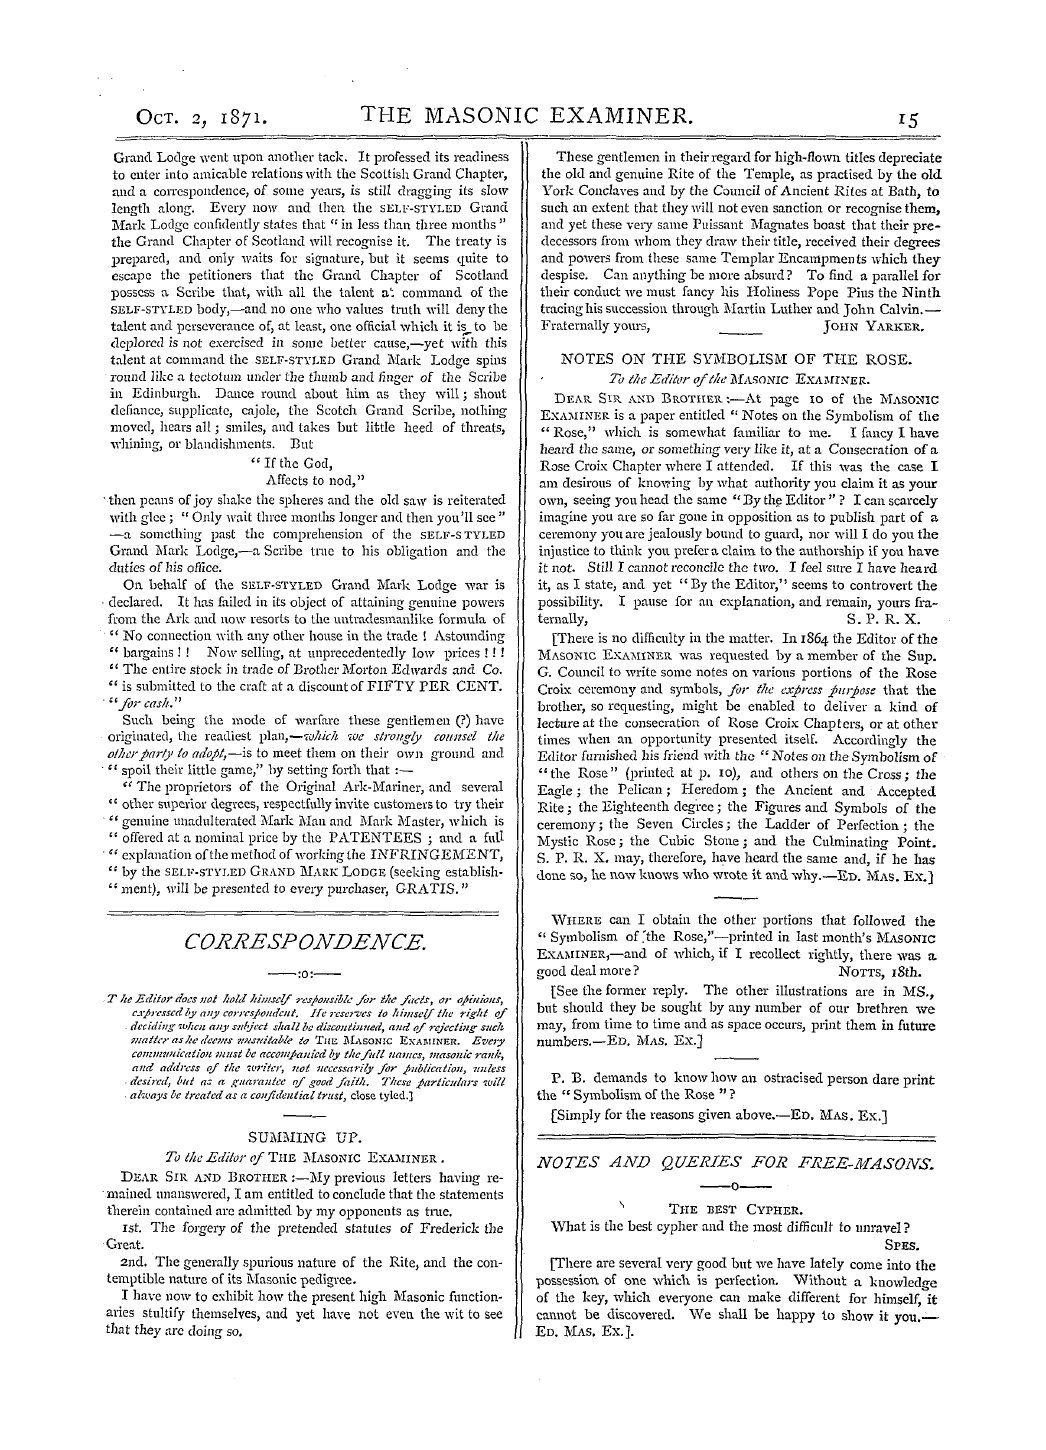 The Masonic Examiner: 1871-10-02 - Notes And Queries For Free-Masons.